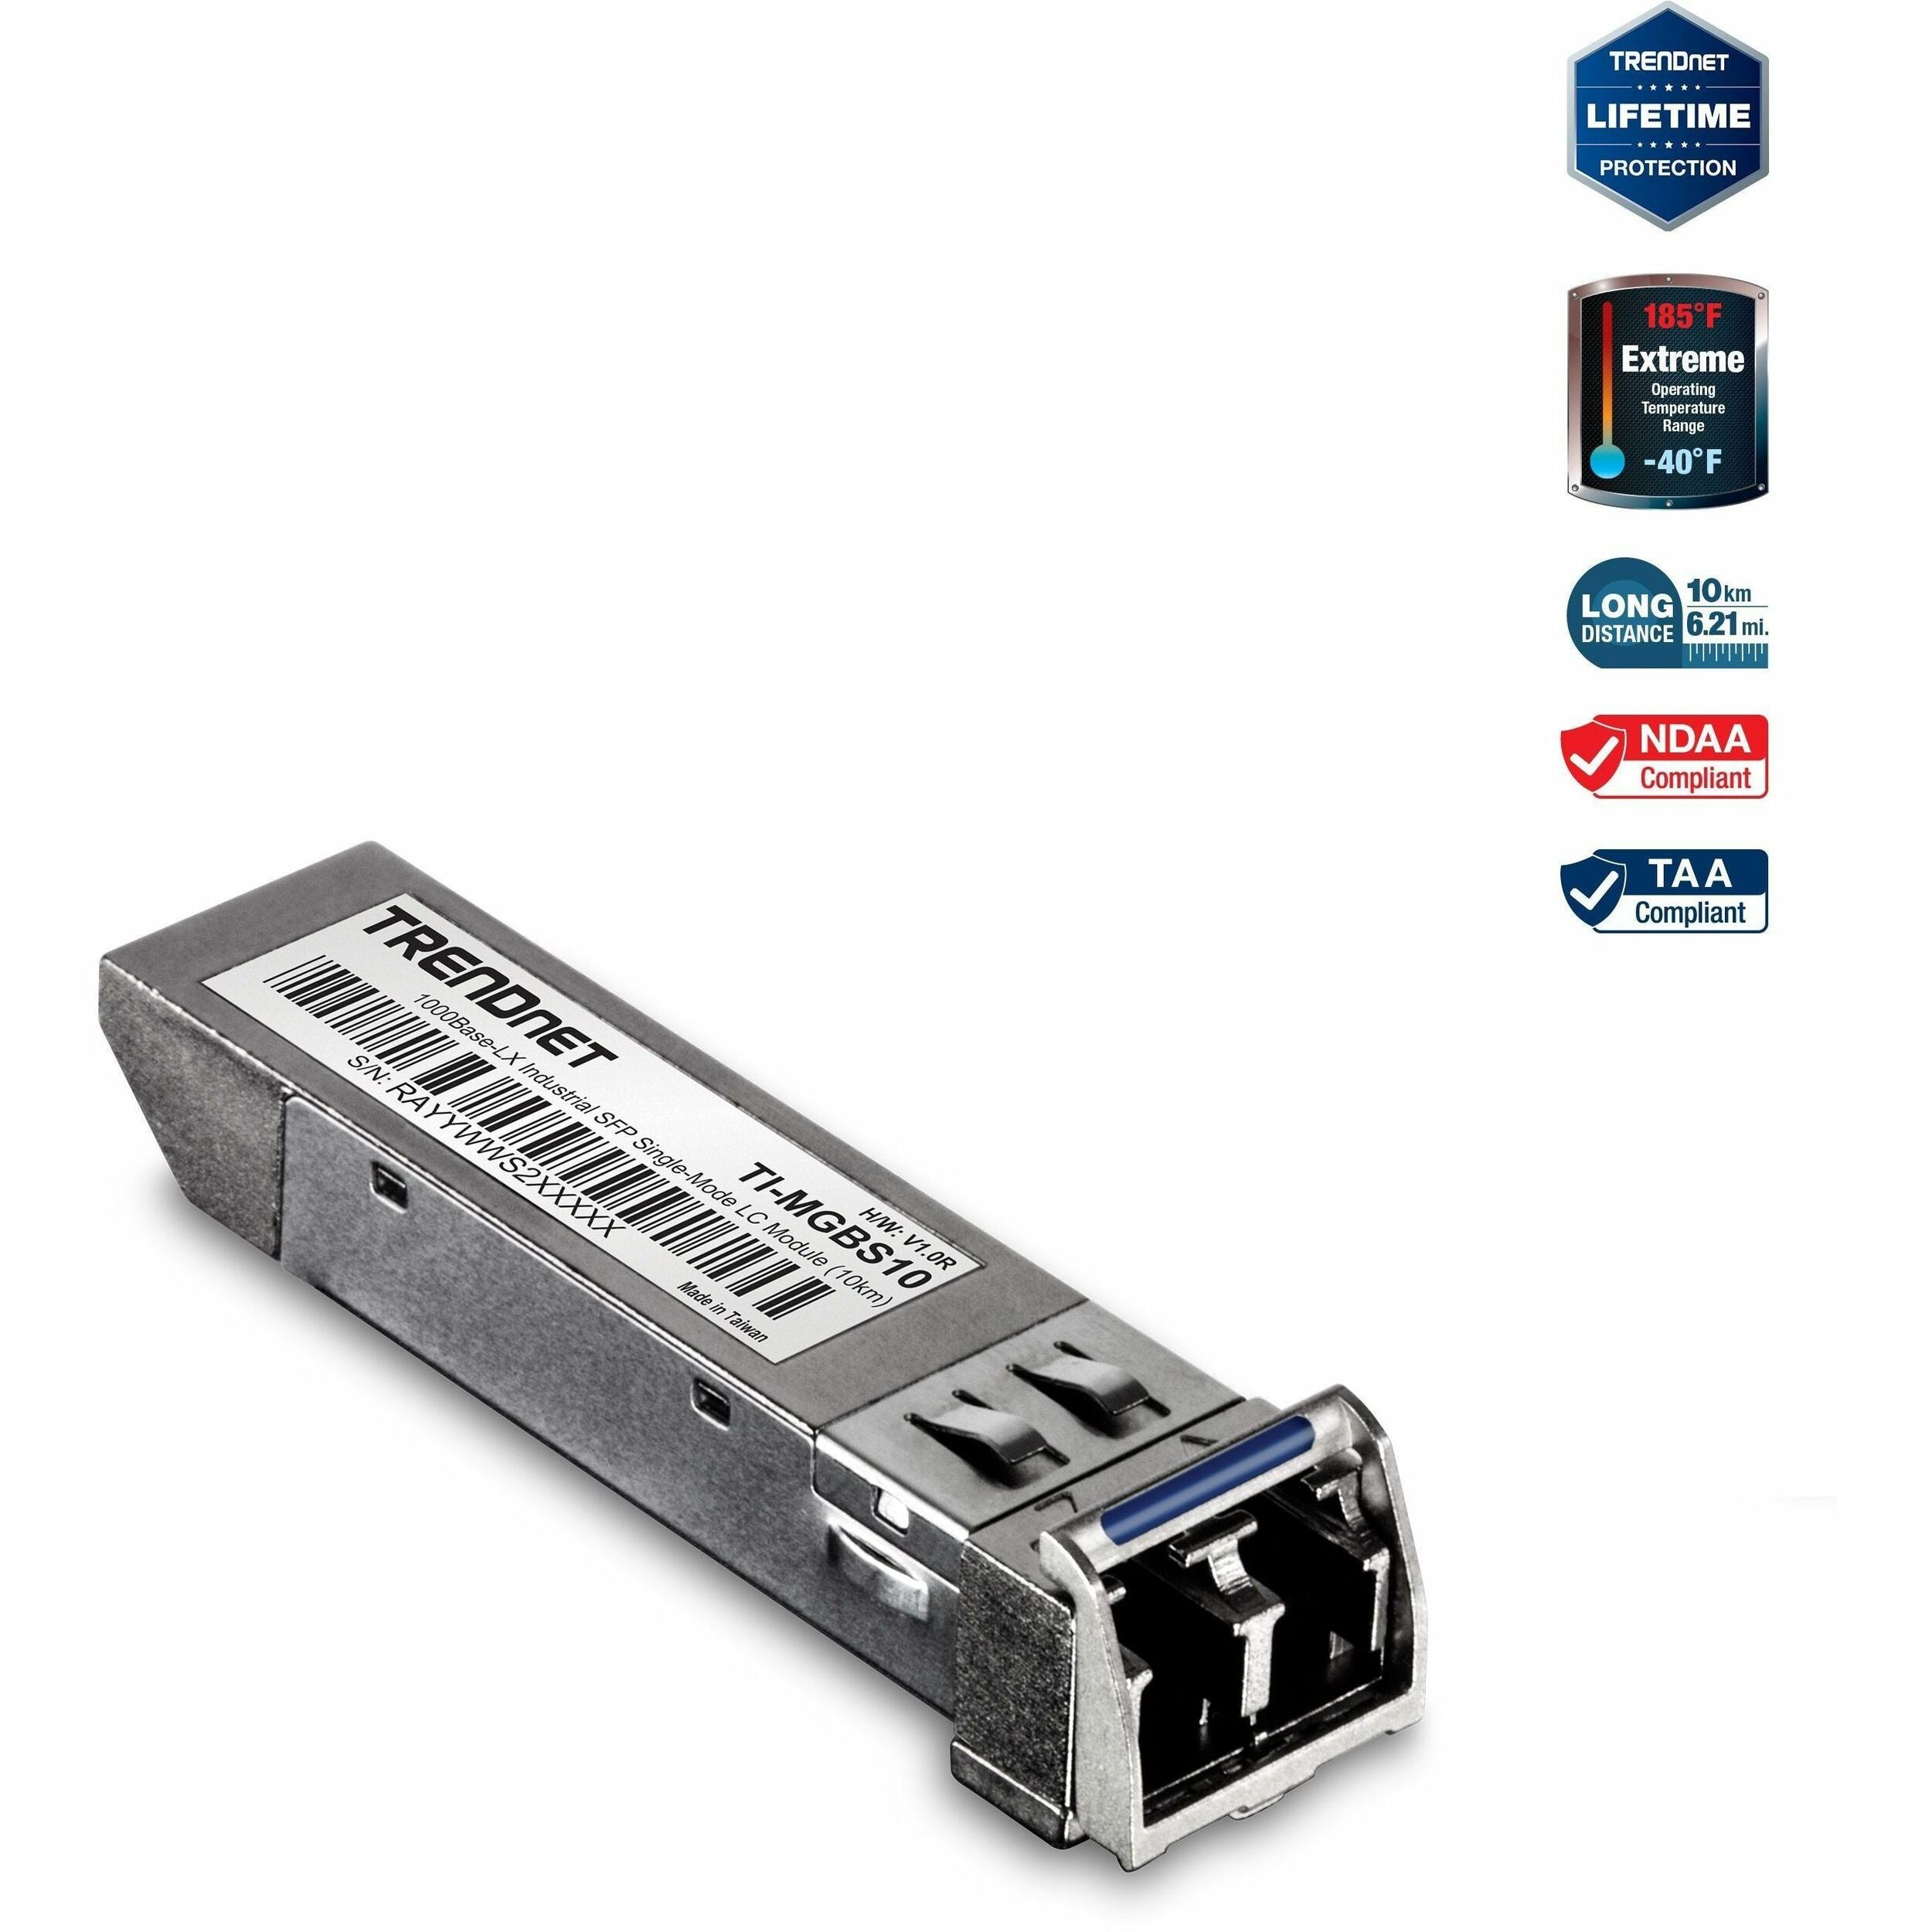 TRENDnet SFP to RJ45 Industrial Single-Mode LC Module (10km); TI-MGBS10; 1000Base-LX Industrial SFP; Compliant with IEEE 802.3z Gigabit Ethernet; Data Rates of up to 1.25Gbps; Lifetime Protection - TI-MGBS10